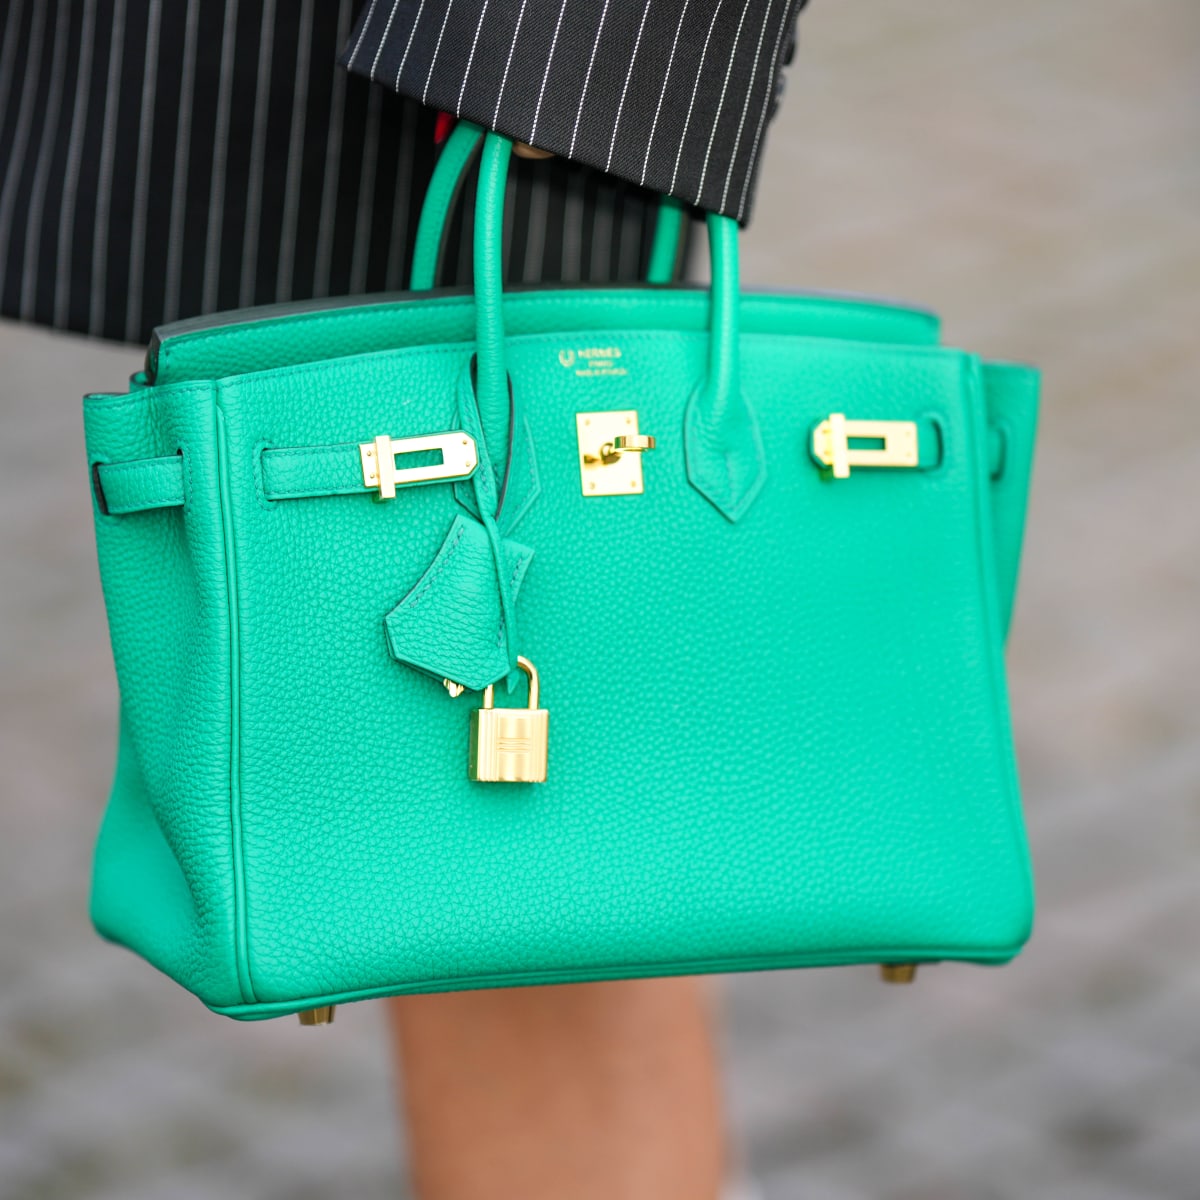 How Your Favorite Hermes Handbags Got Their Names - Authentic Hermes